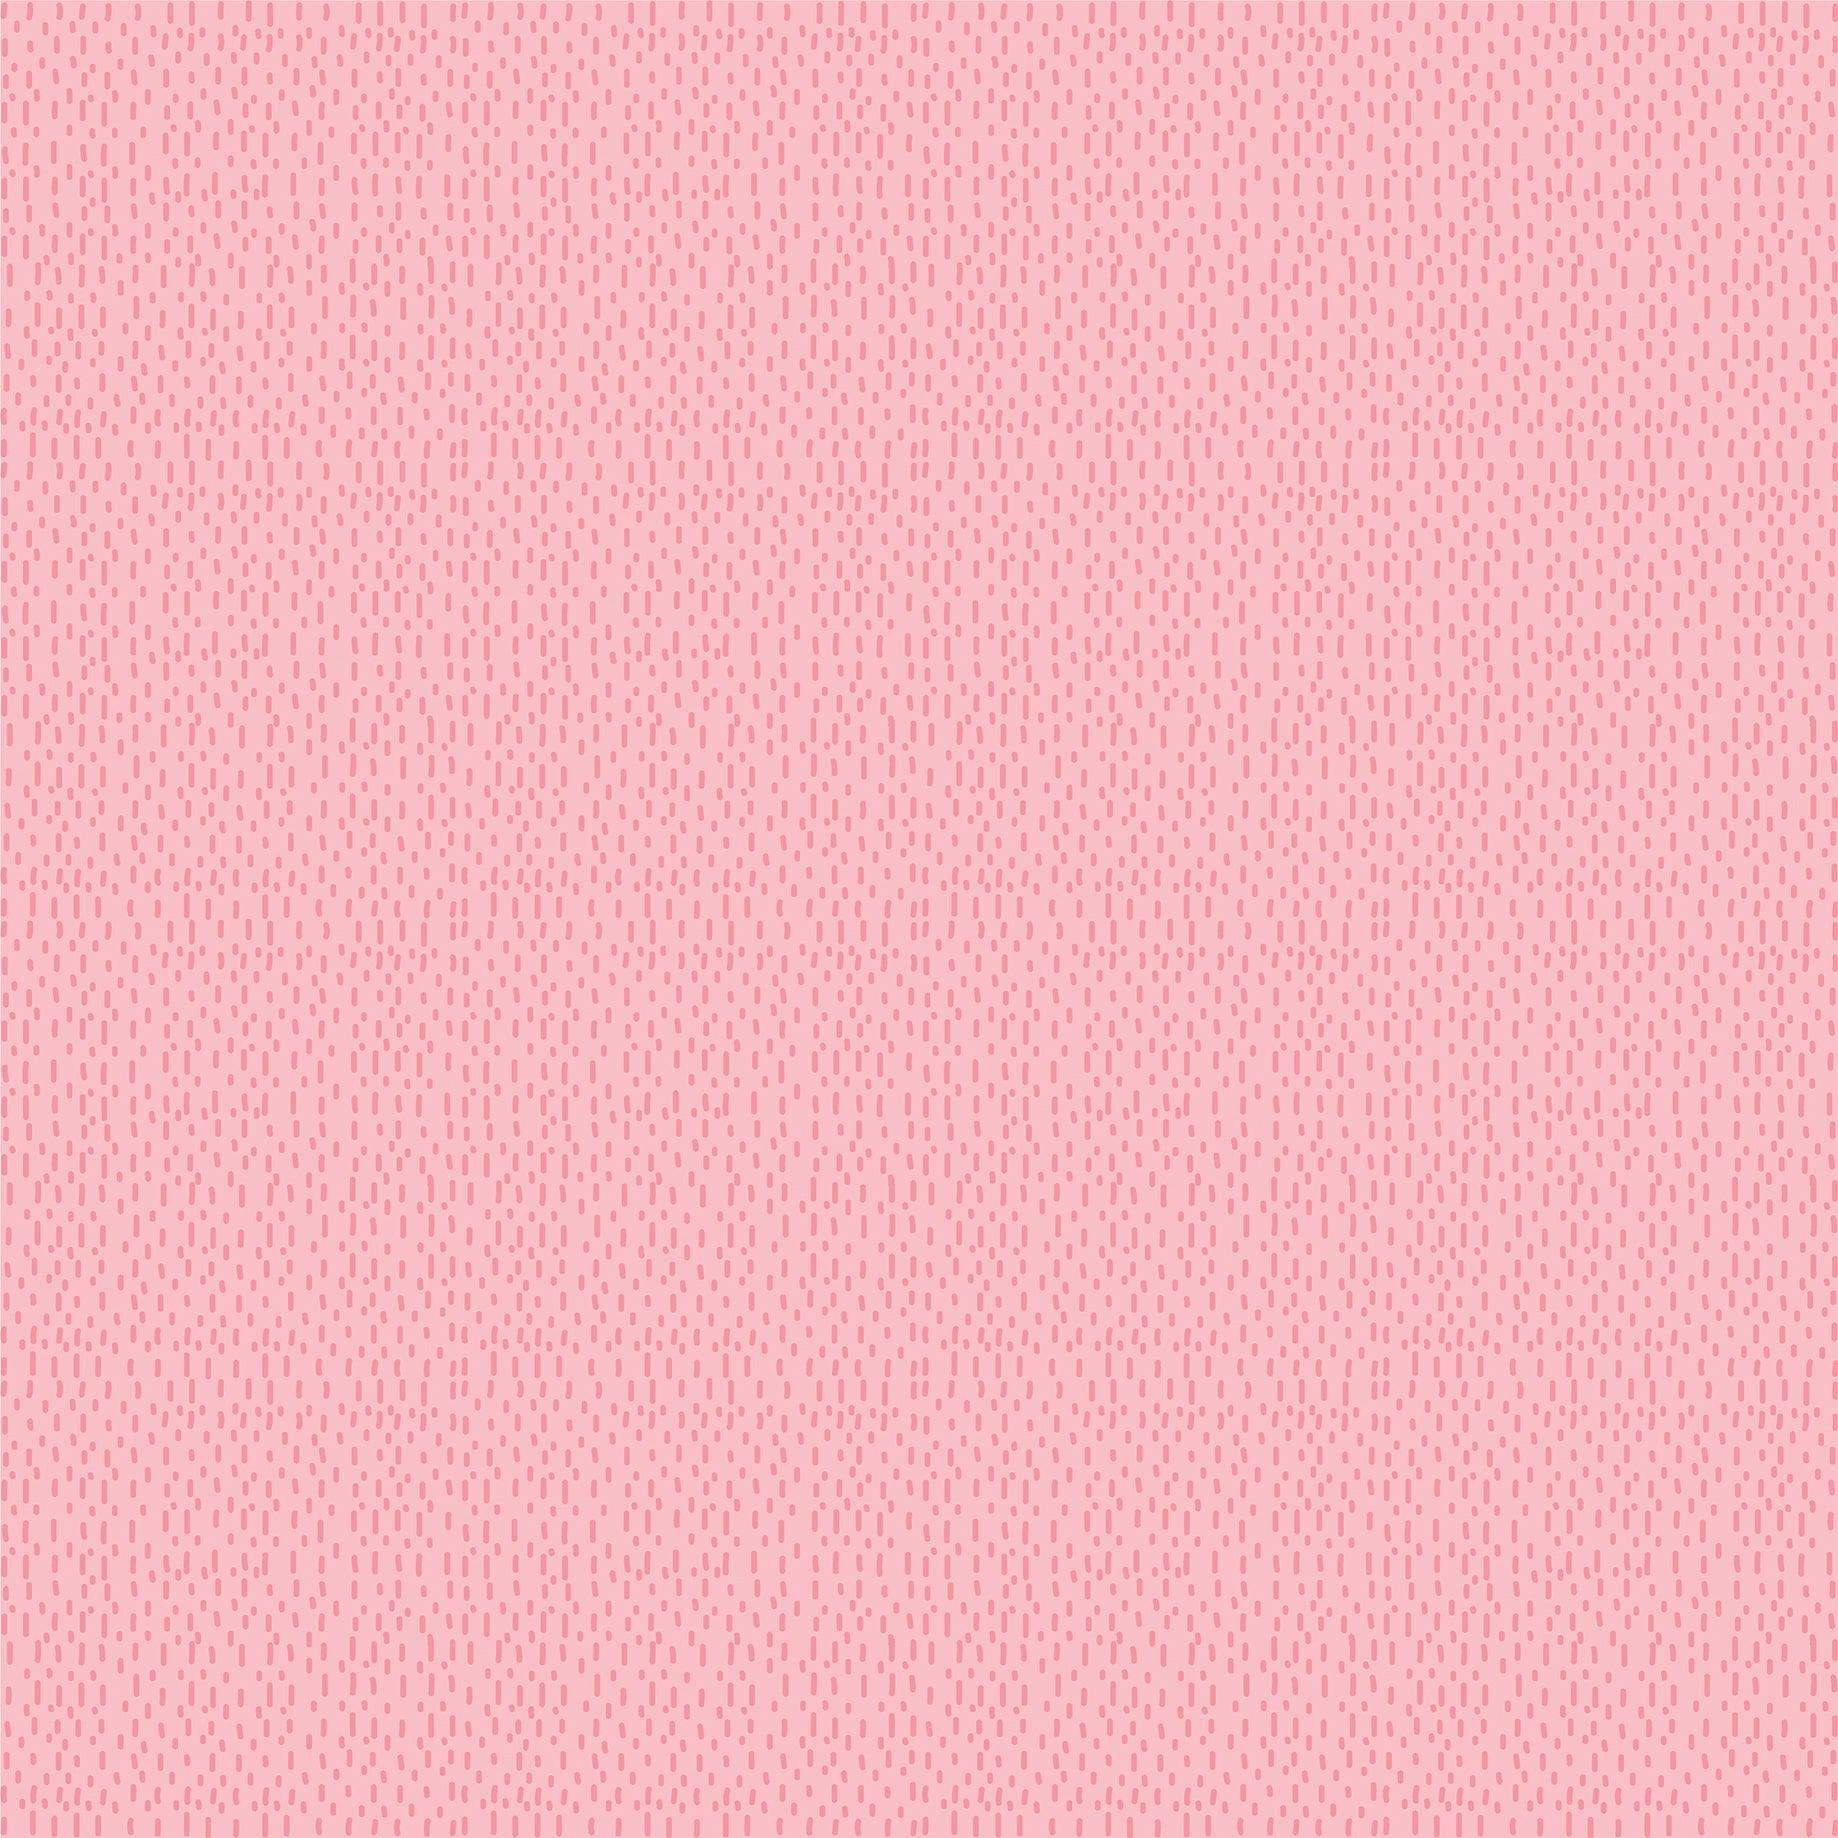 All About A Girl Collection So Sweet 12 x 12 Double-Sided Scrapbook Paper by Echo Park Paper - Scrapbook Supply Companies